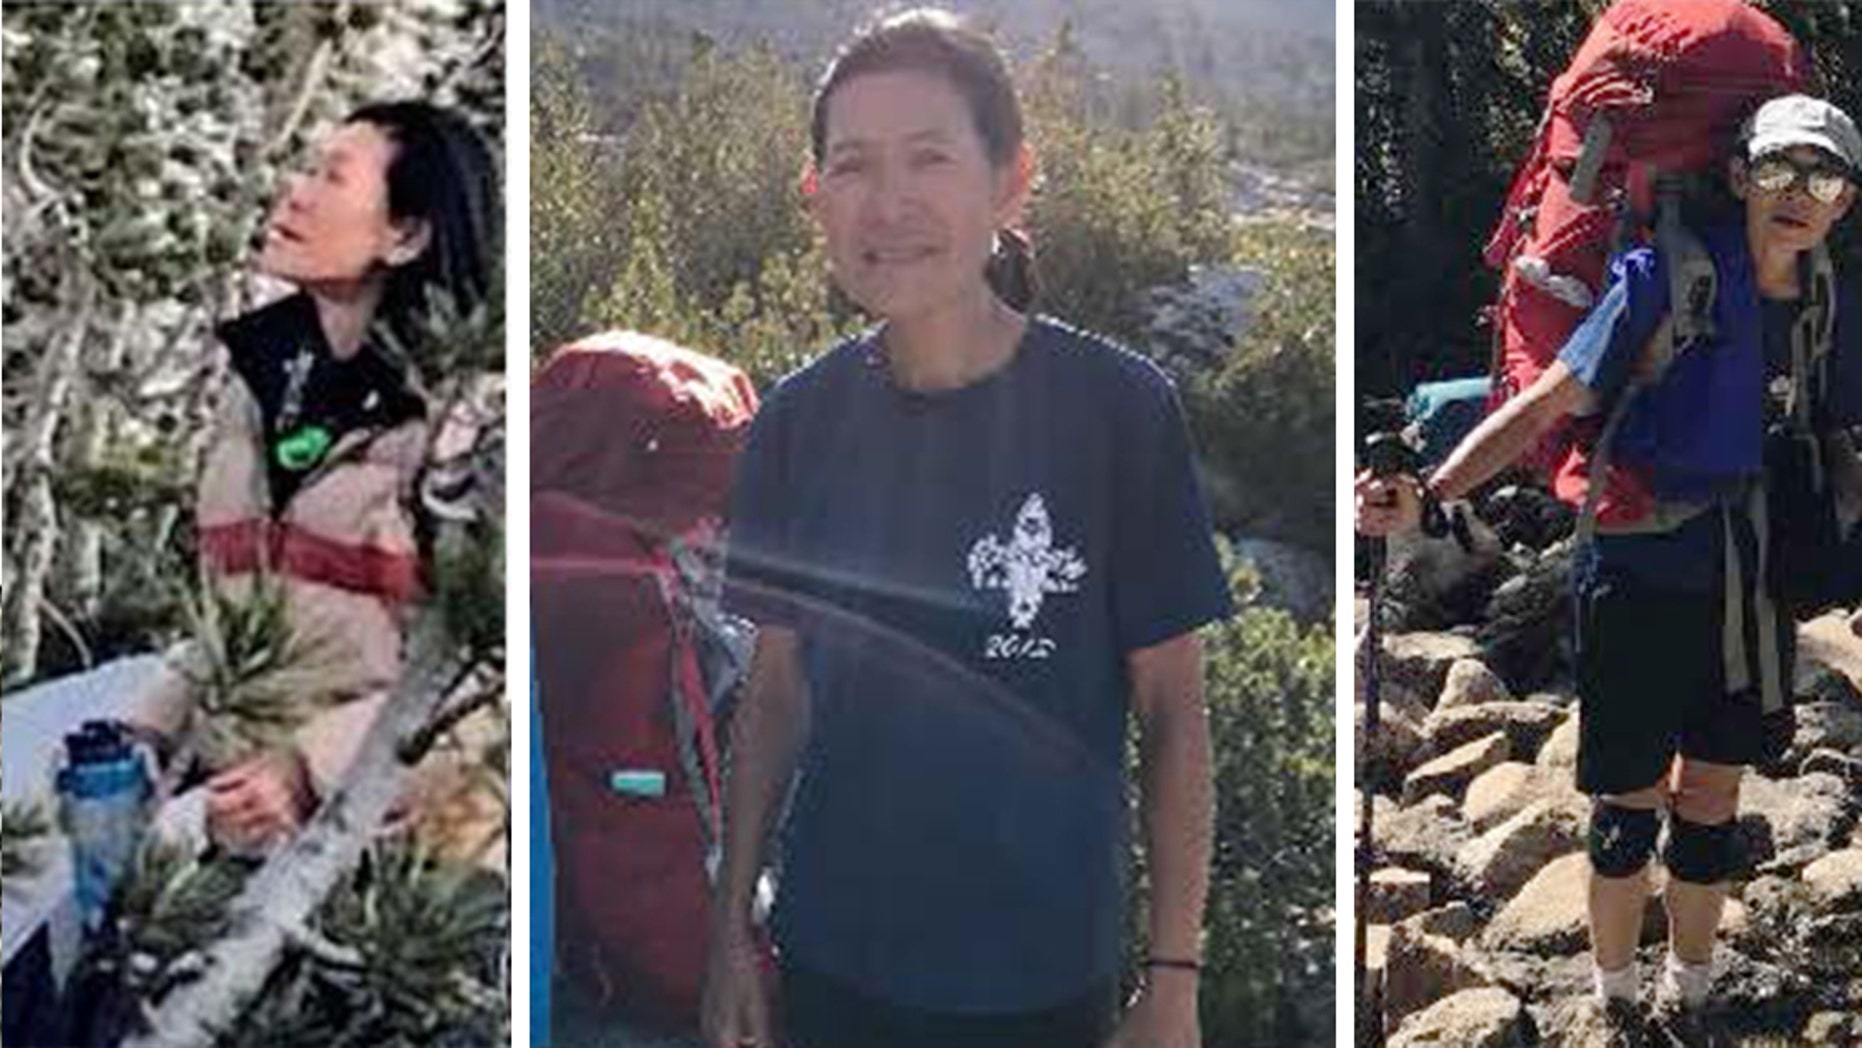 Diane Salmon, 63, who was hiking in Kings Canyon National Park, was 